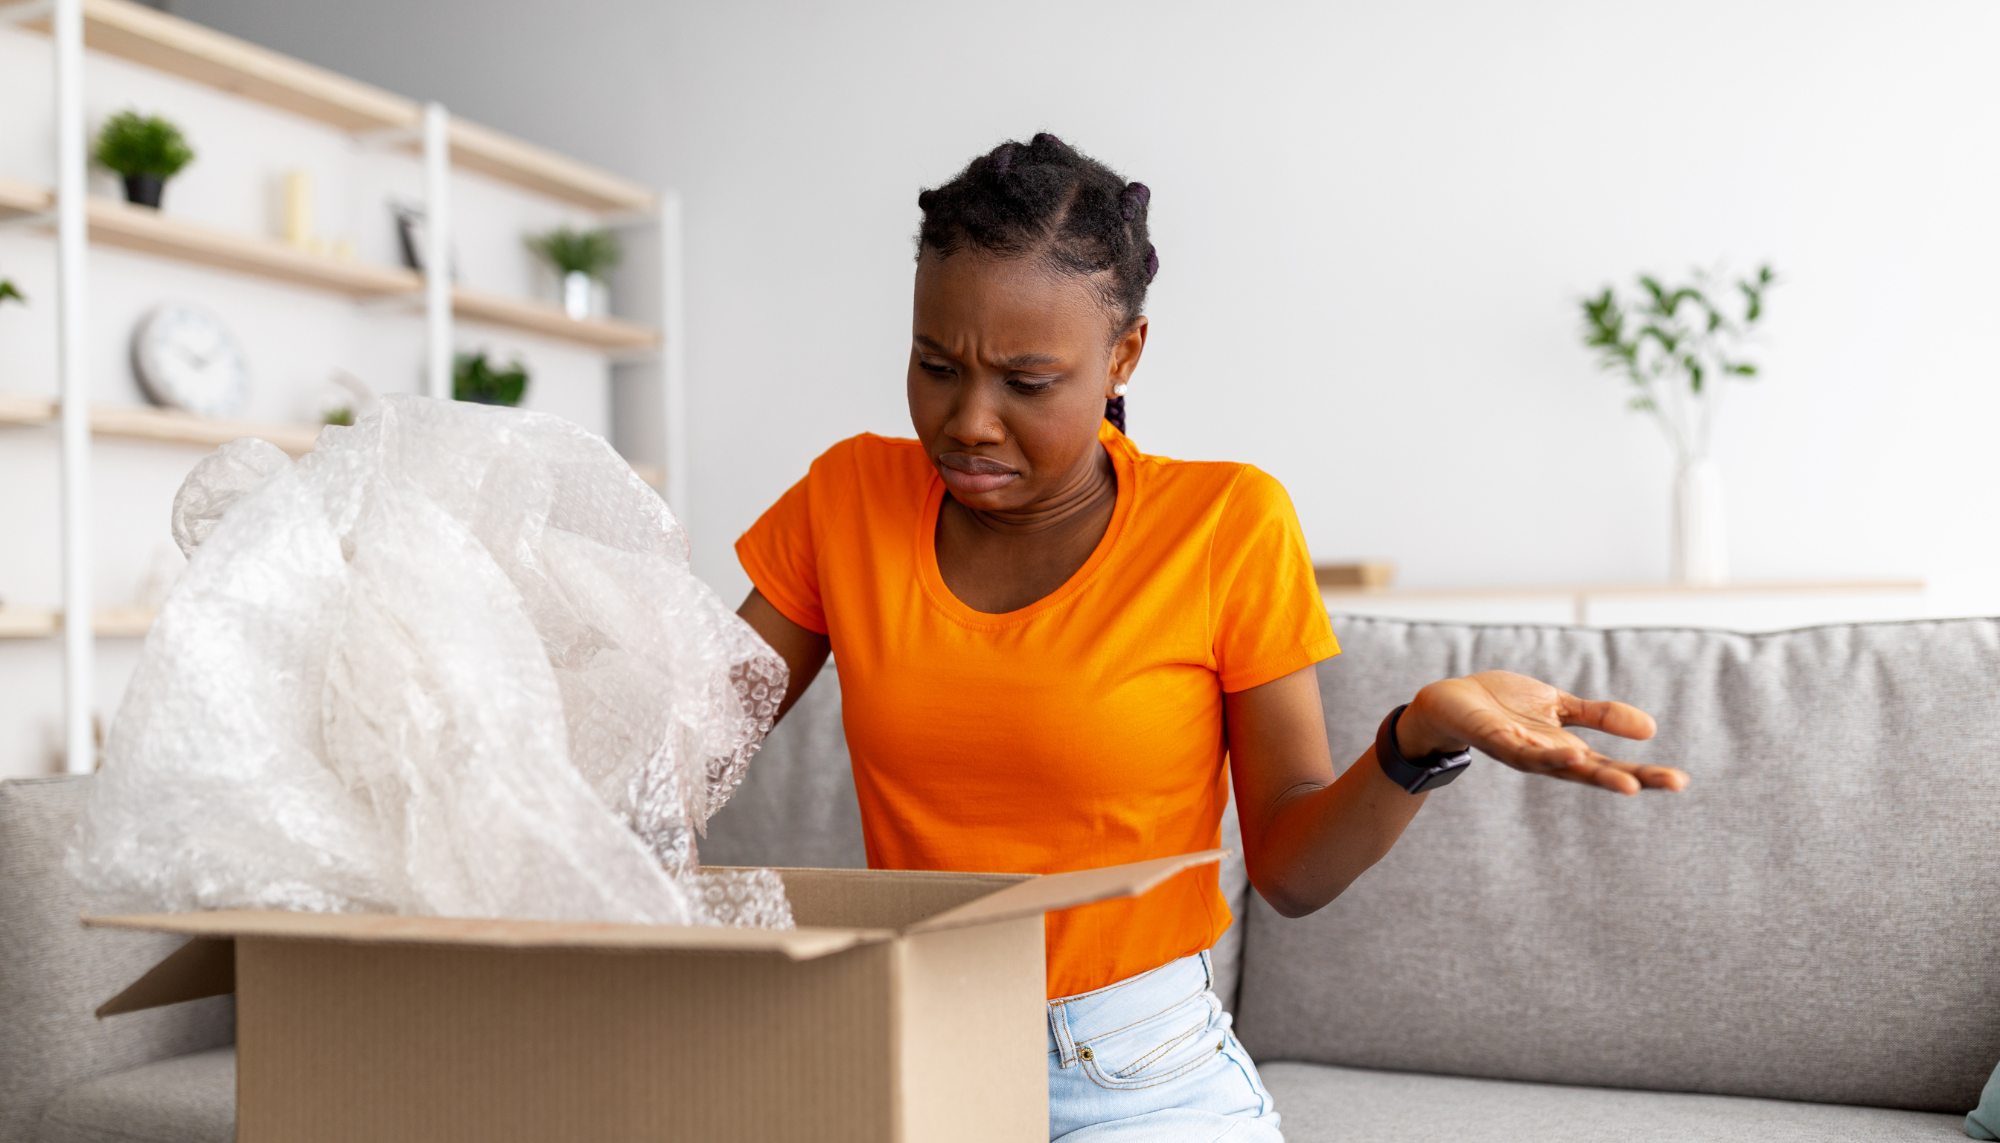 Black woman looking confused while opening a box